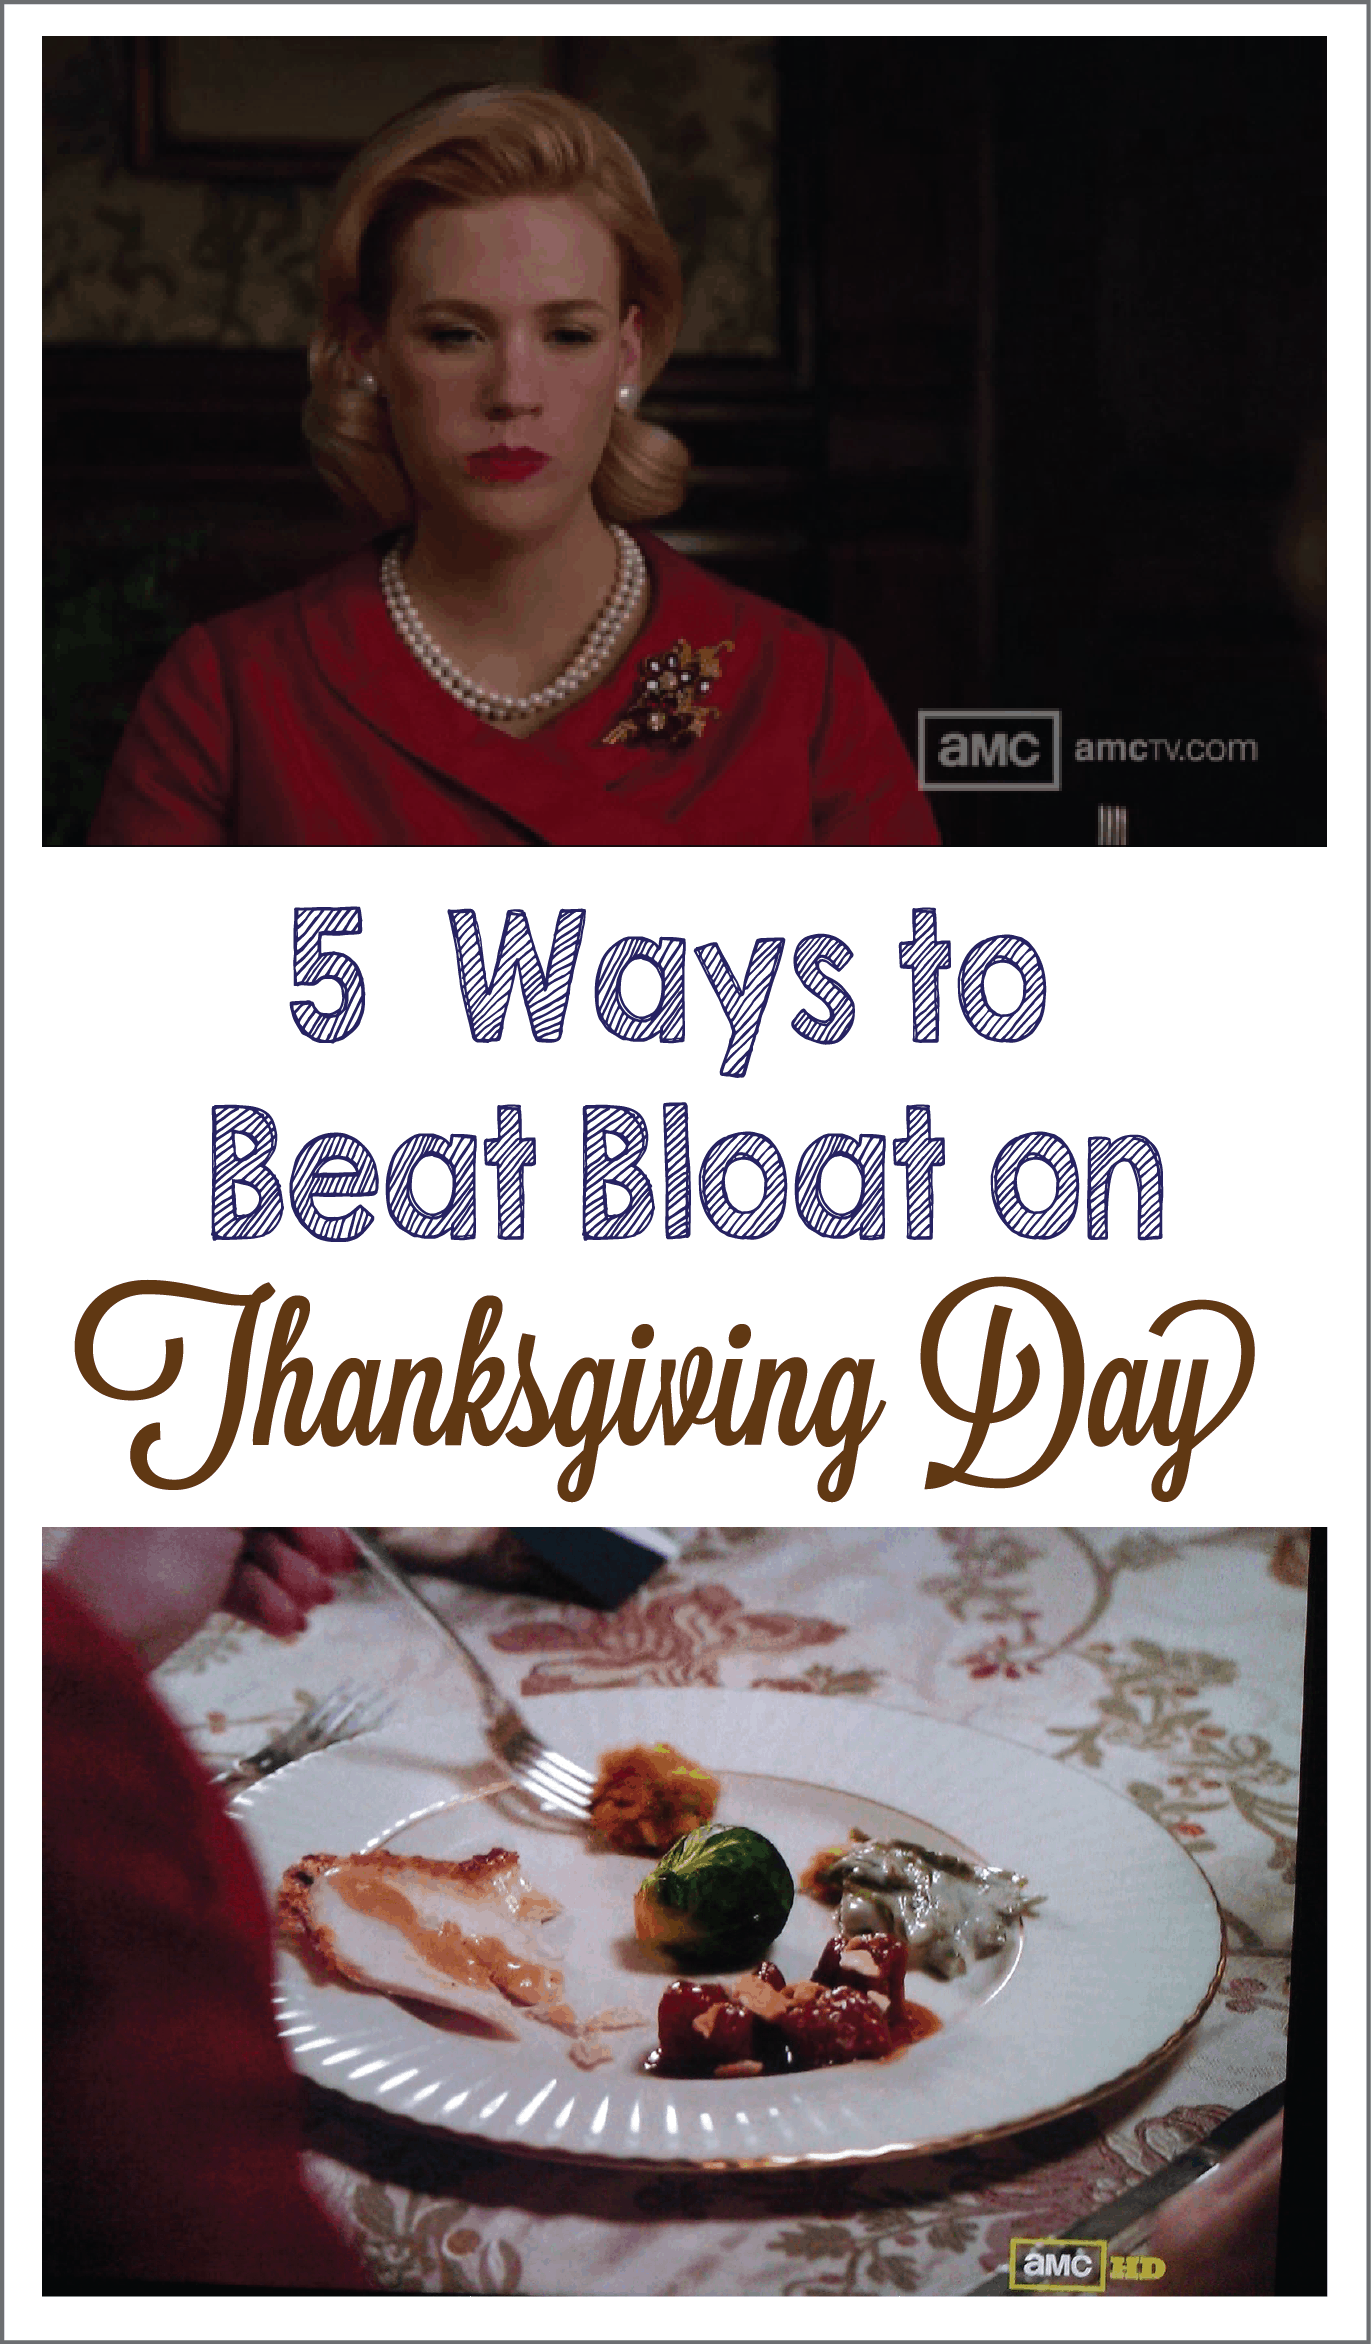 5 ways to beat bloat on Thanksgiving Day will arm you with tips to make your dinner as comfortable as possible.   #thanksgiving #holidays